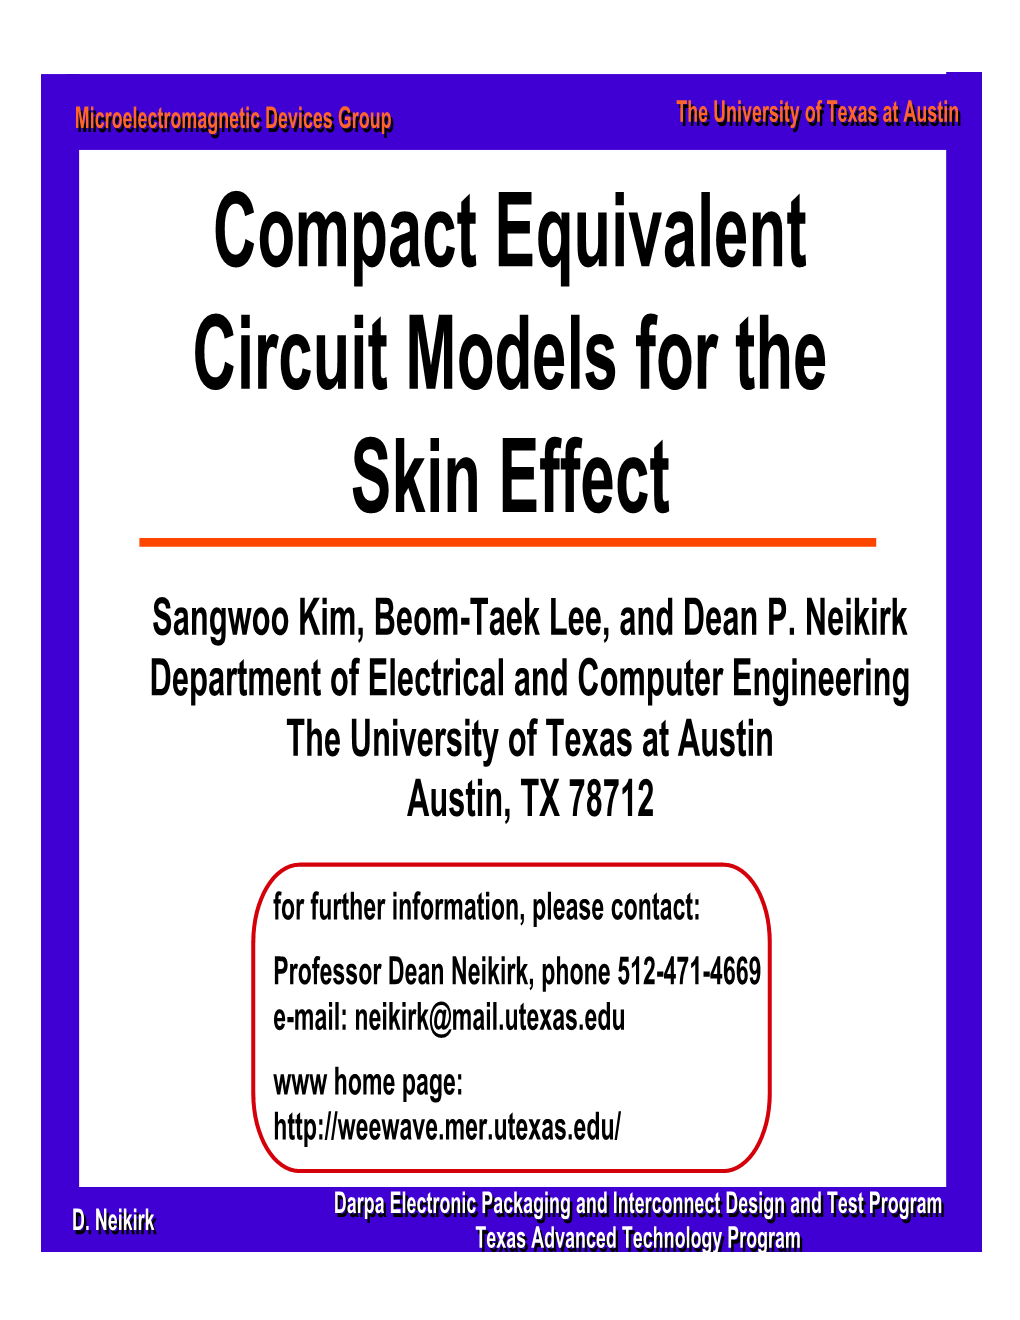 Compact Equivalent Circuit Models for the Skin Effect